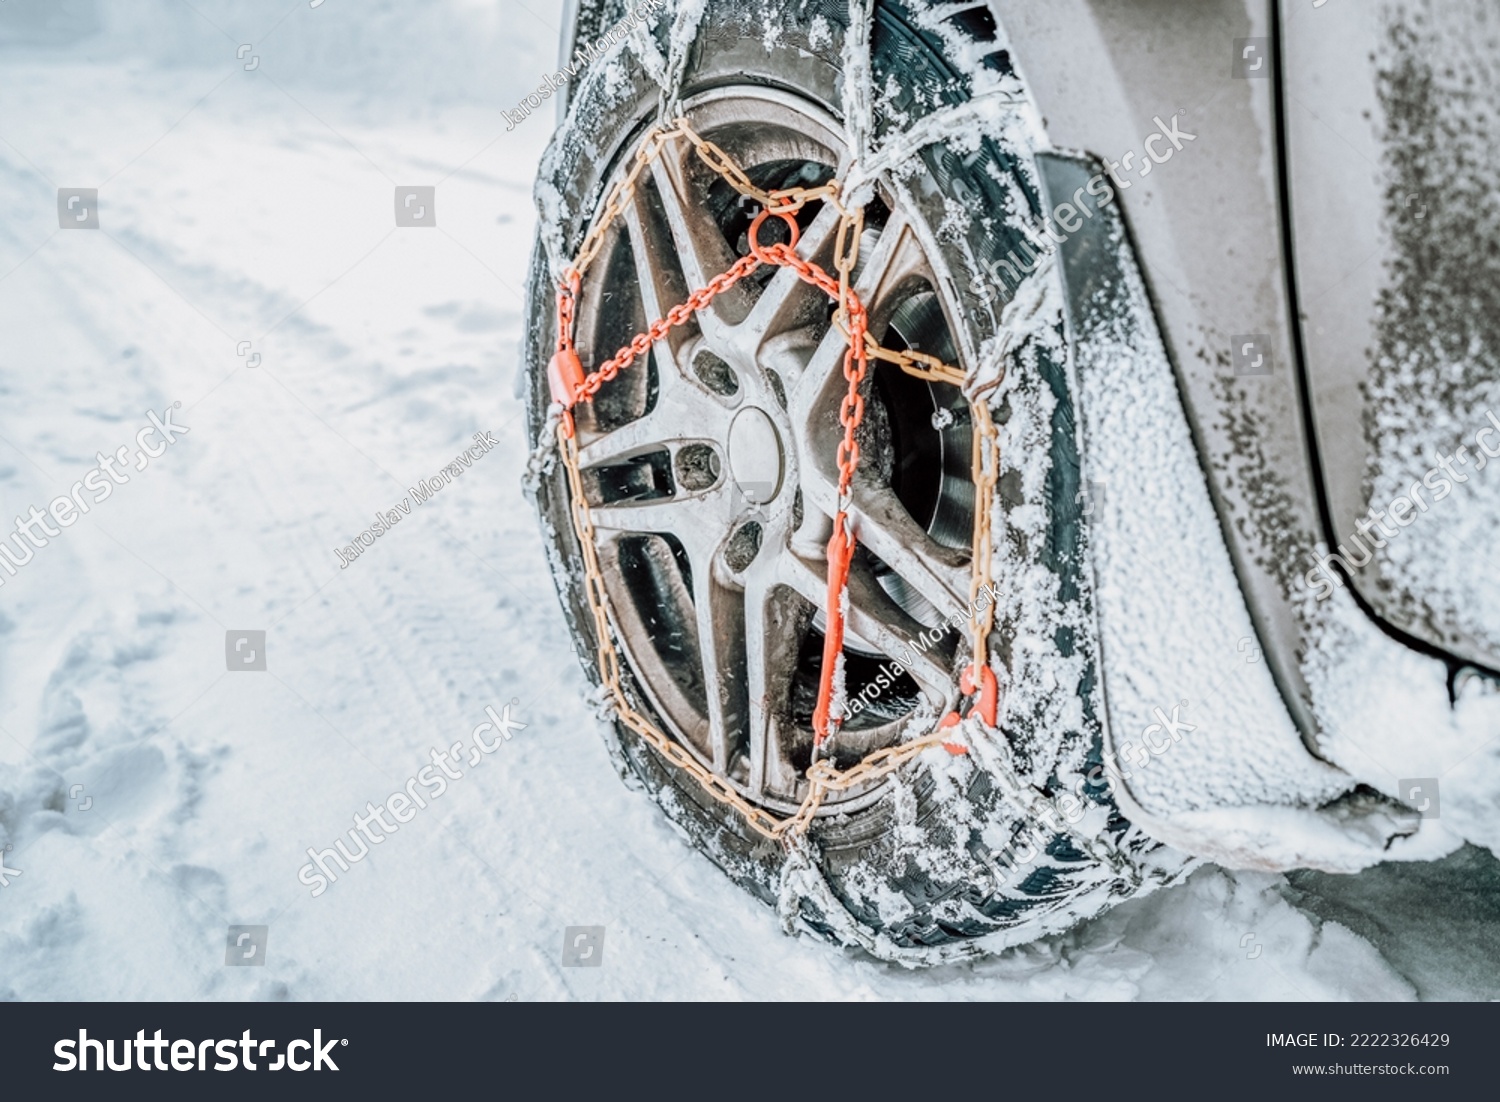 Snow chains on tire. Car wheel with traction chains on a snowy winter road #2222326429